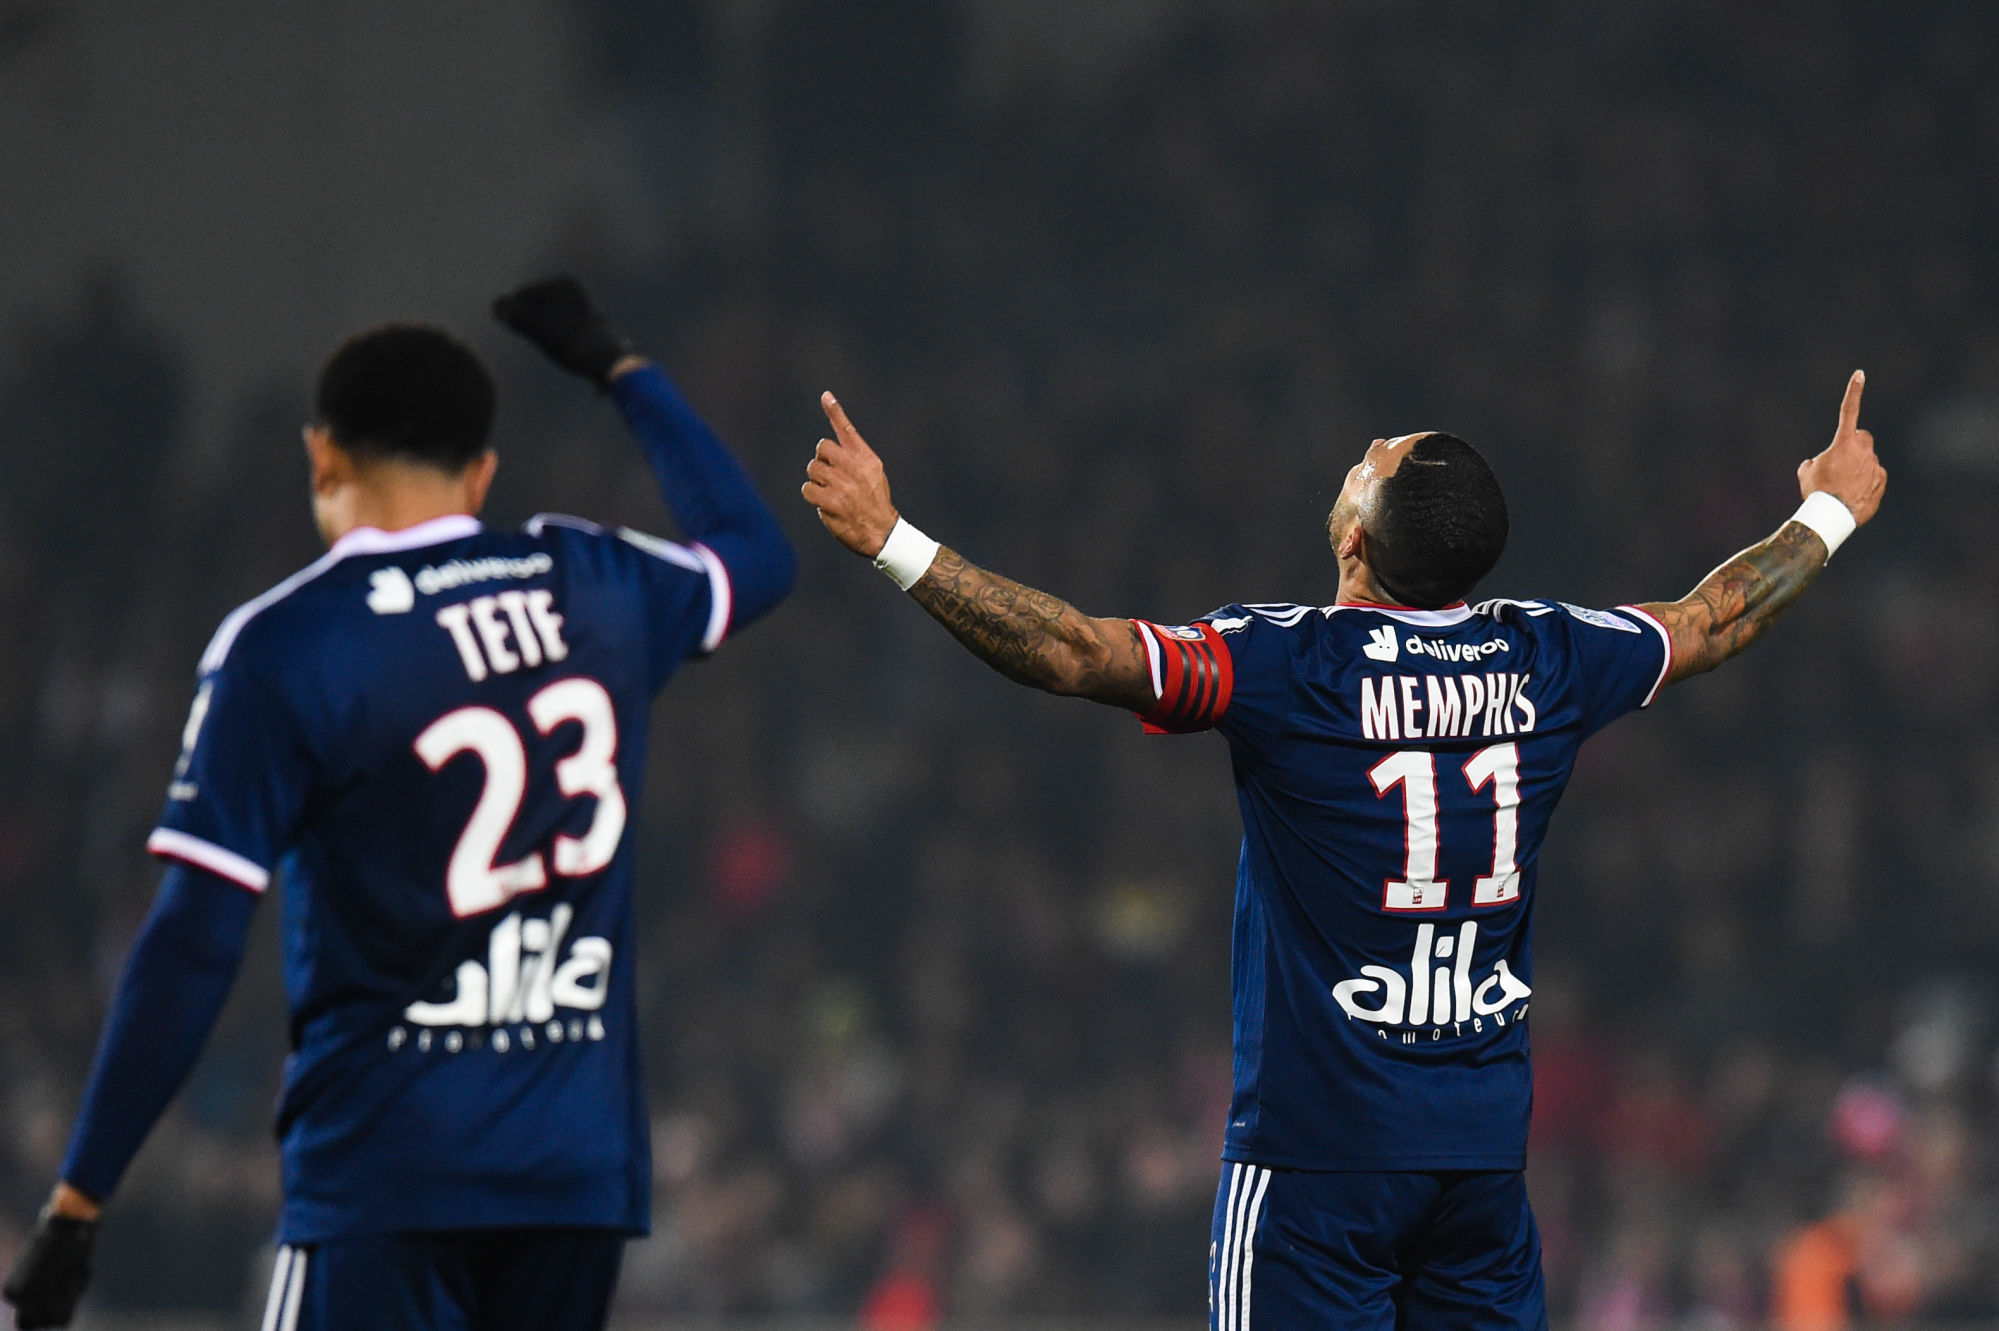 Memphis DEPAY of Lyon celebrates  his second goal  during the Ligue 1 match between Nimes and Lyon on December 6, 2019 in Nimes, France. (Photo by Alexandre Dimou/Icon Sport) - Kenny TETE - Memphis DEPAY - Stade des Costières - Nimes (France)